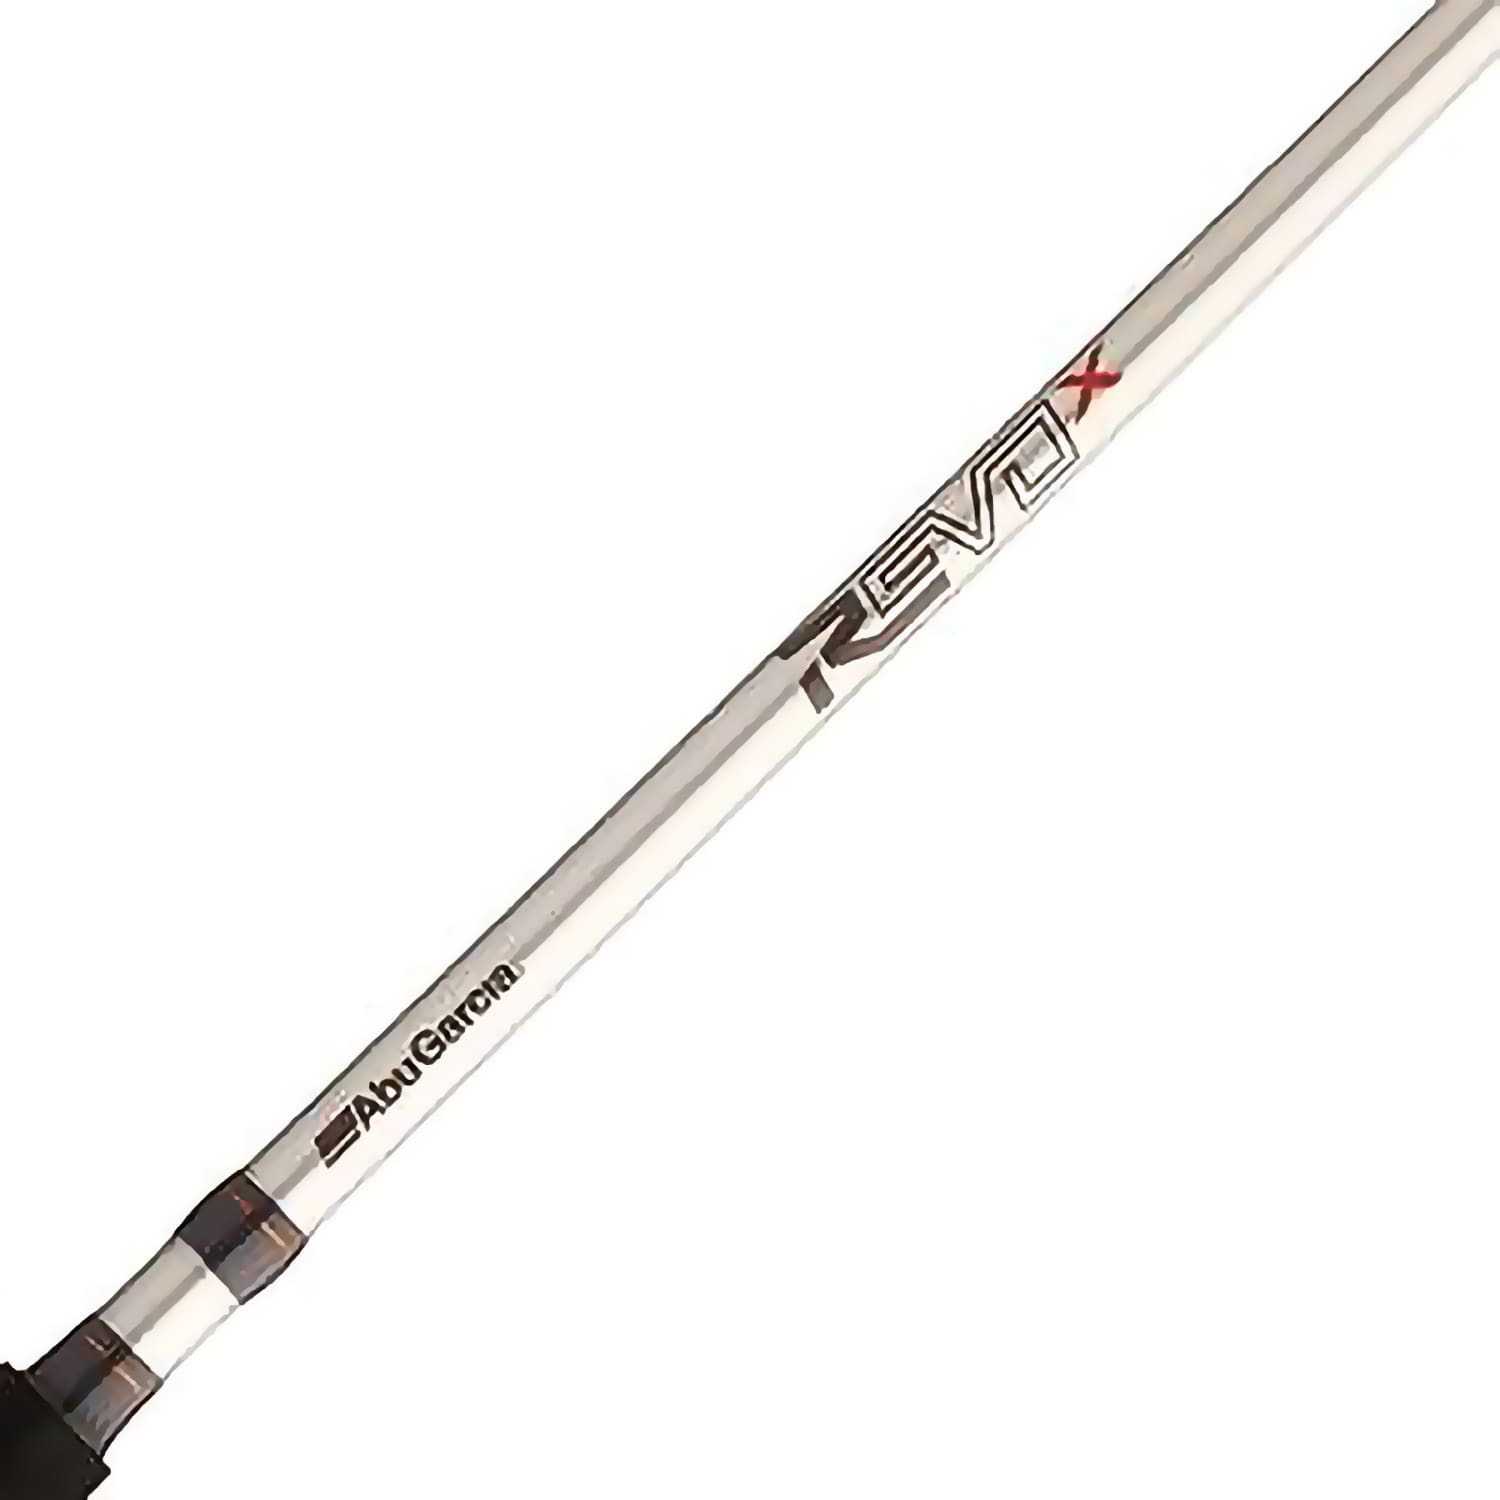 Abu Garcia Revolution Spinning Rod and Reel Combo Set - For Freshwater and  Saltwater Predator Fishing 2.13